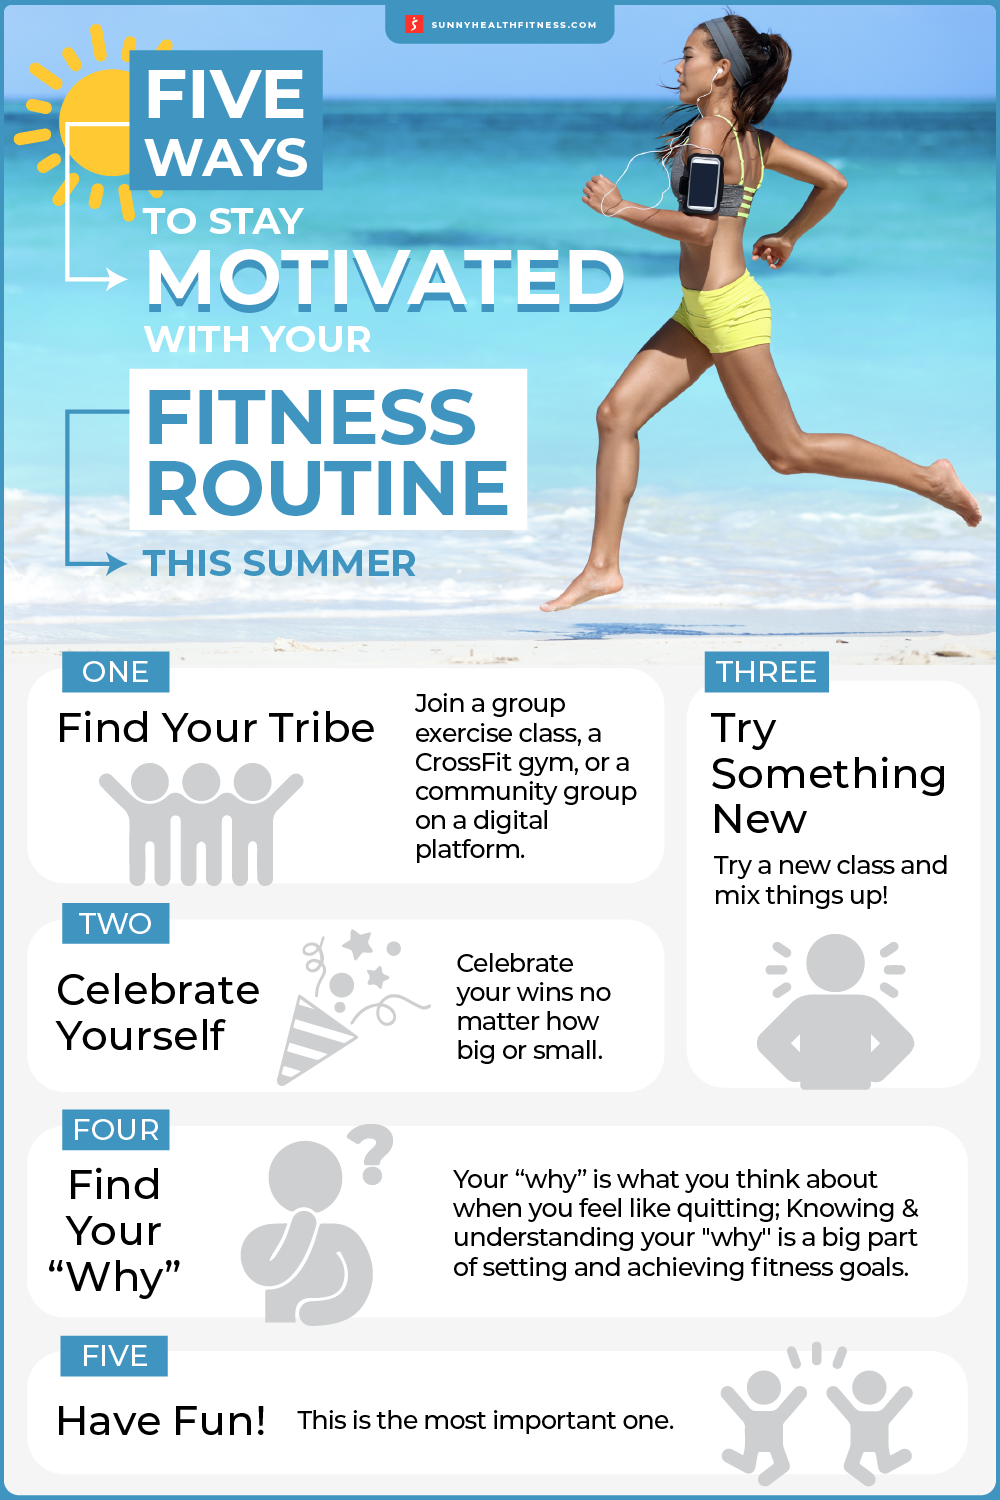 5 Ways to Stay Motivated With Your Fitness Routine This Summer